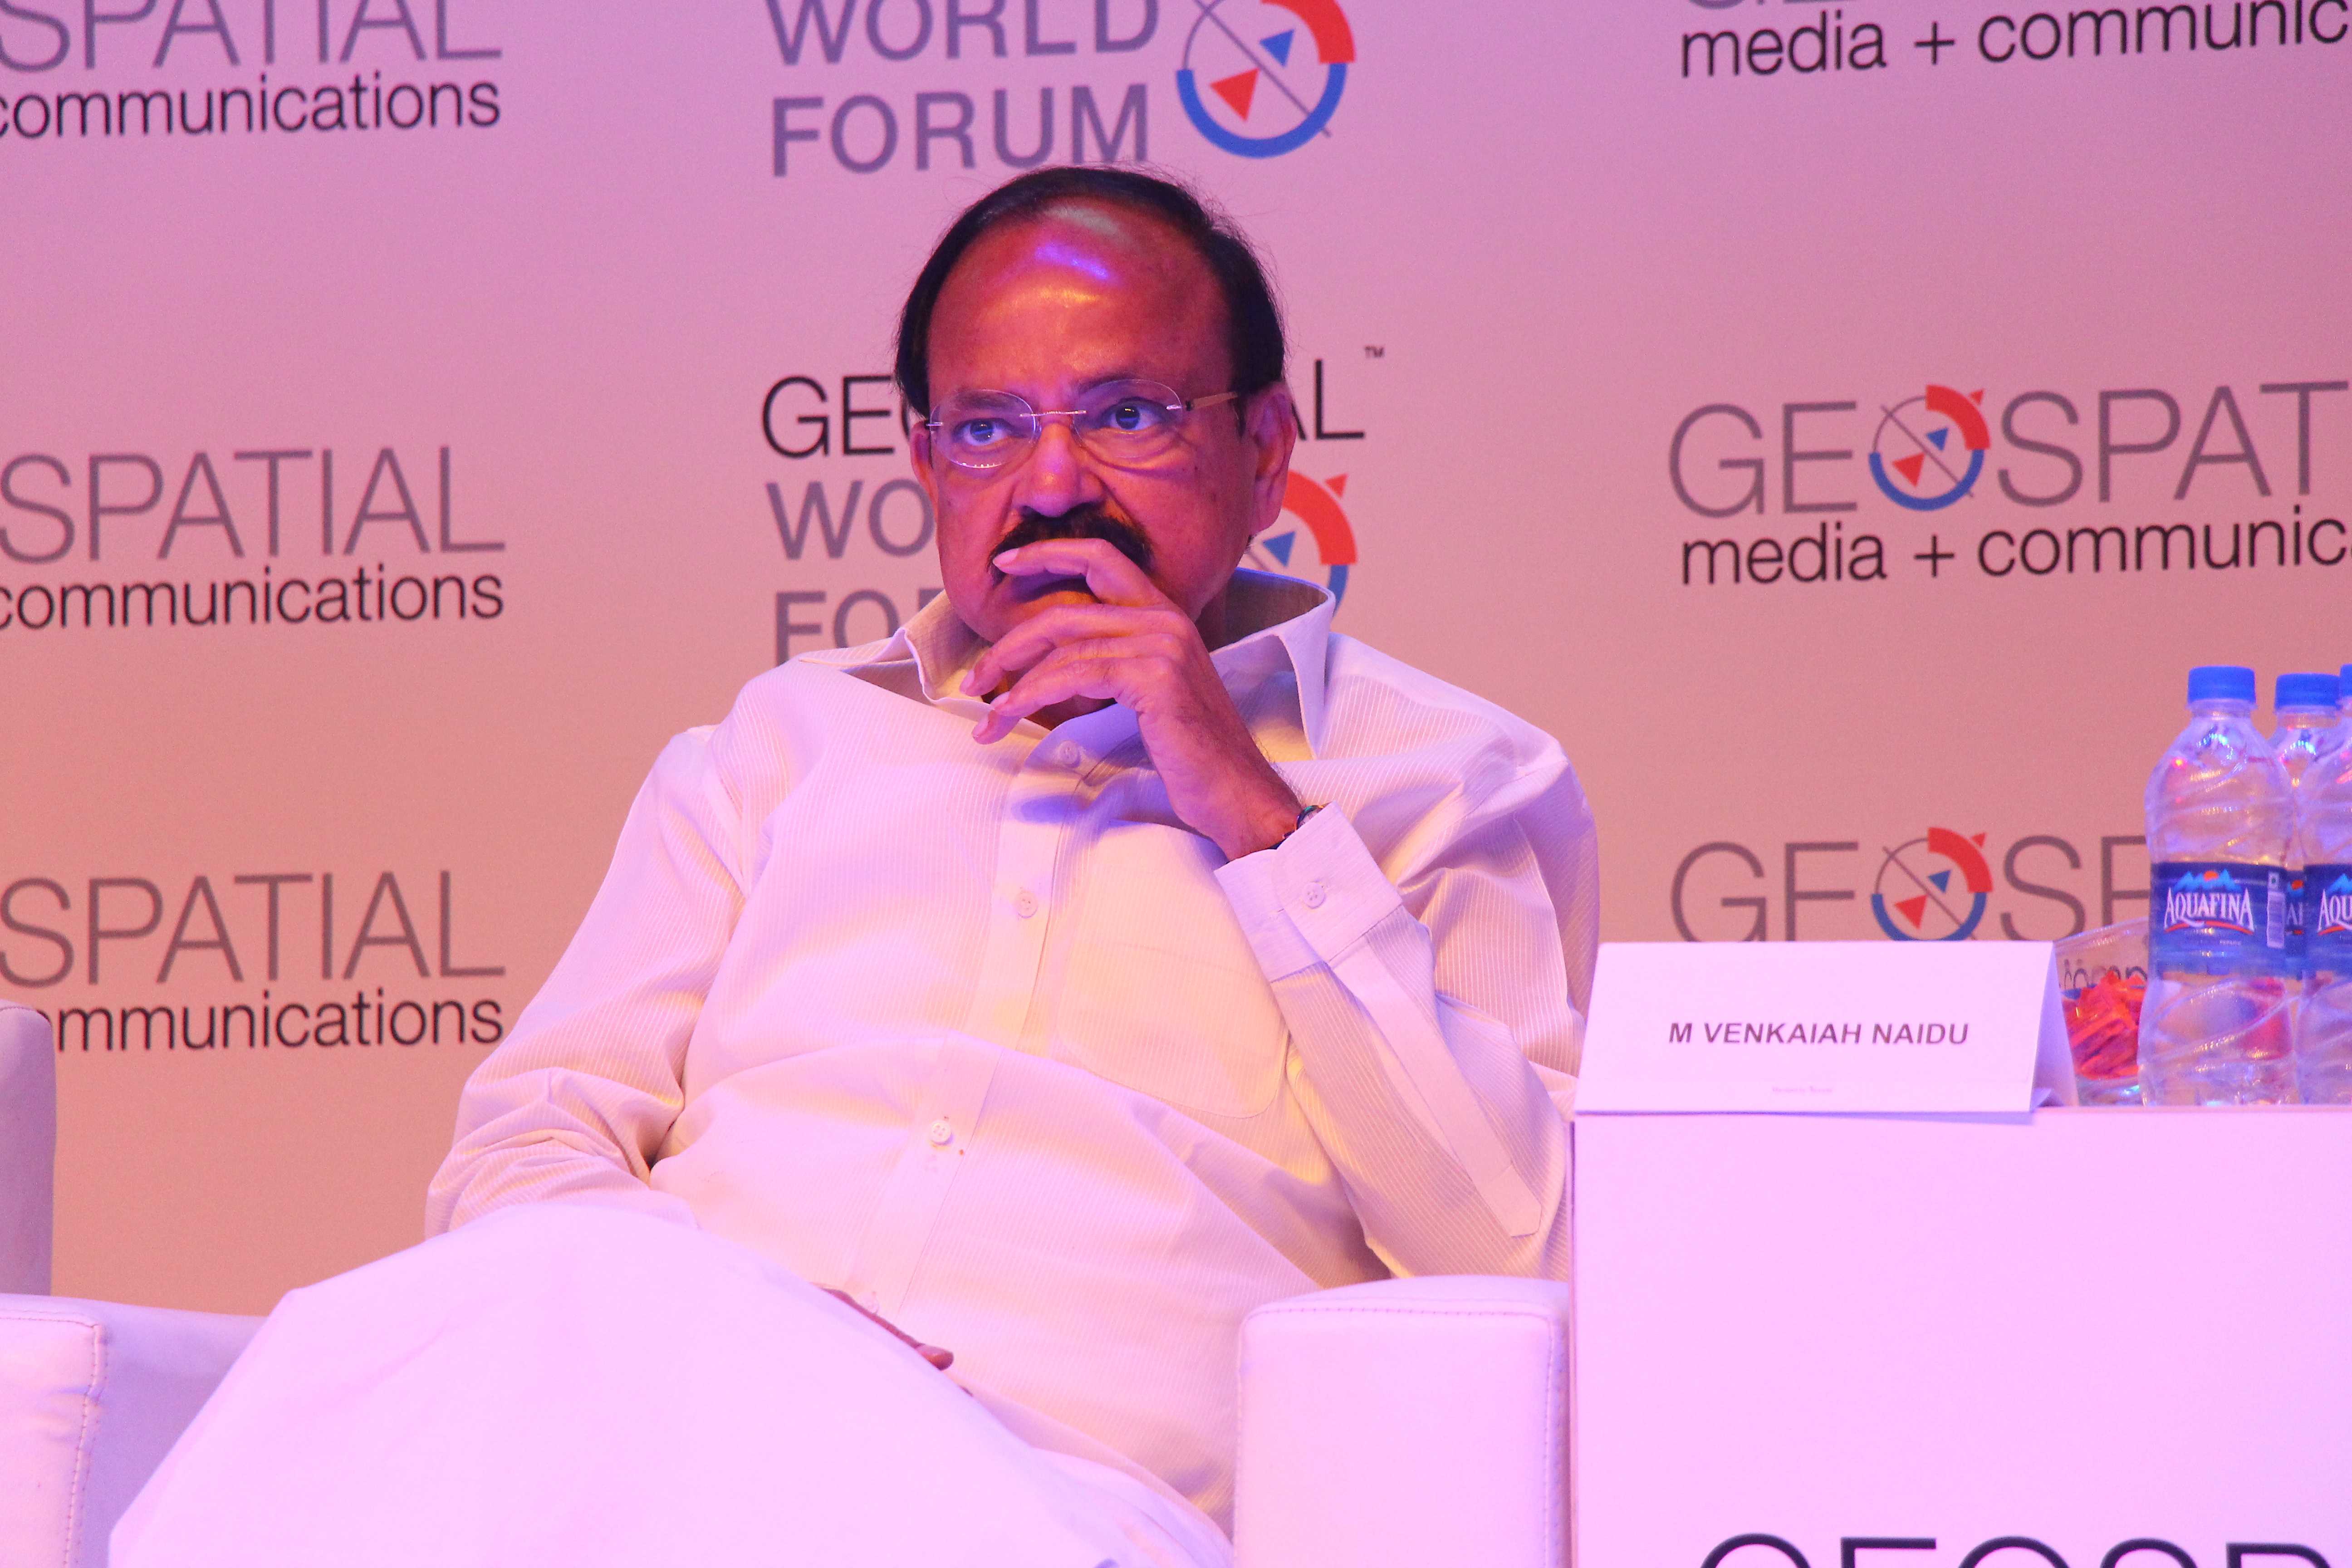 According to Congress, Venkaiah Naidu’s response on allegations has raised more questions